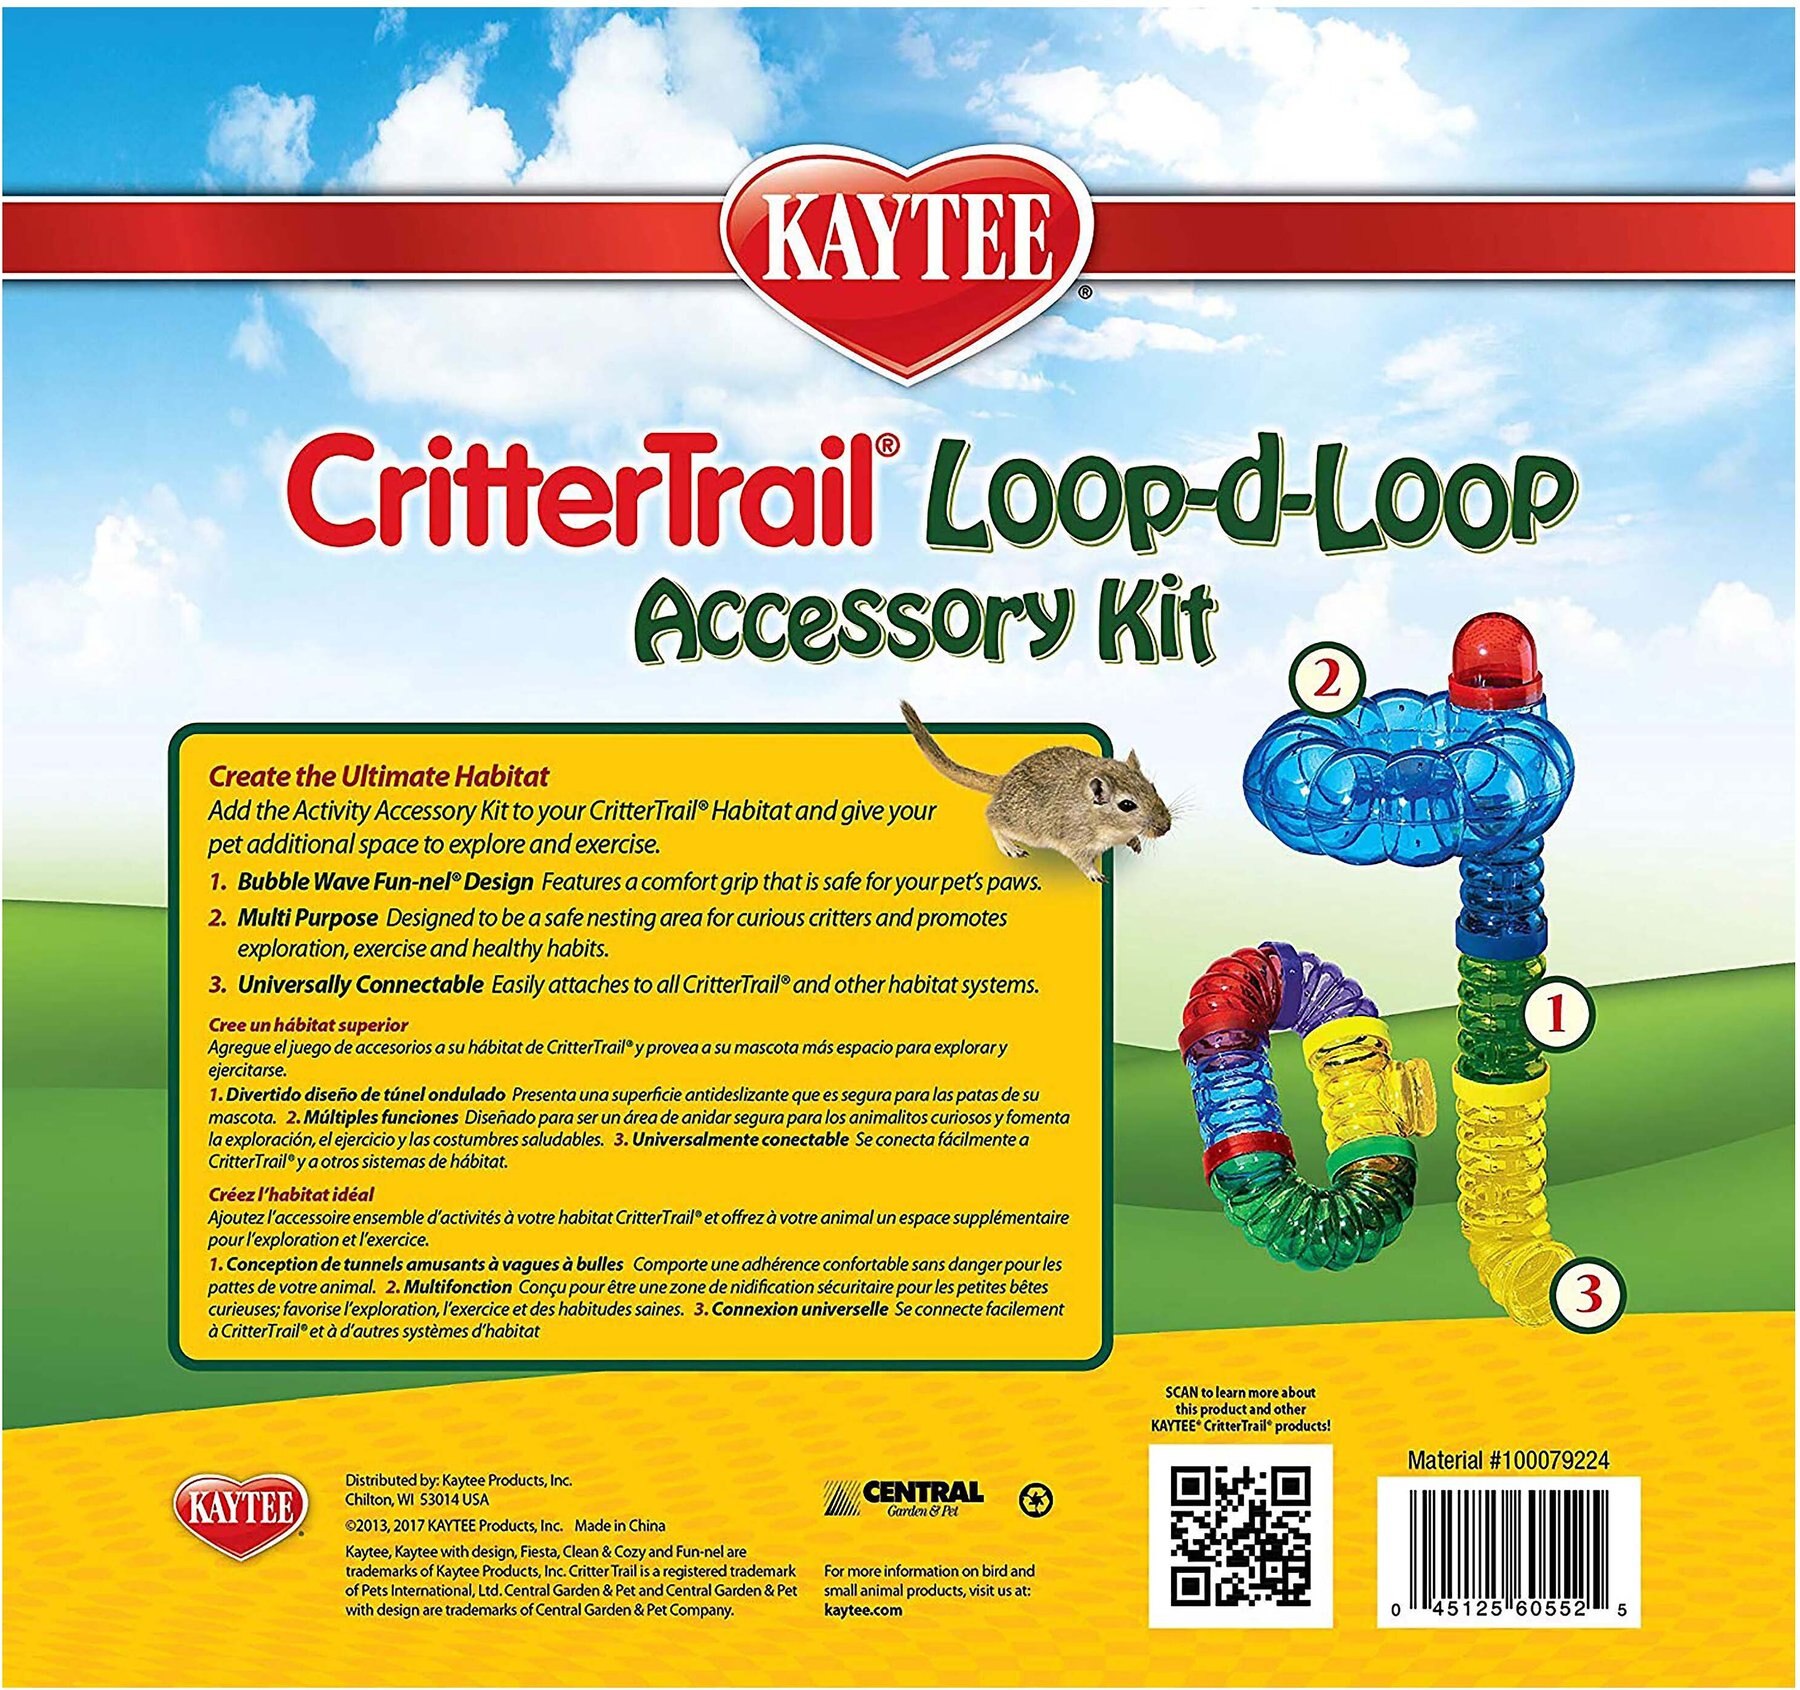 Kaytee Critter Trail Lazy Look-Out Accessory Kit 1